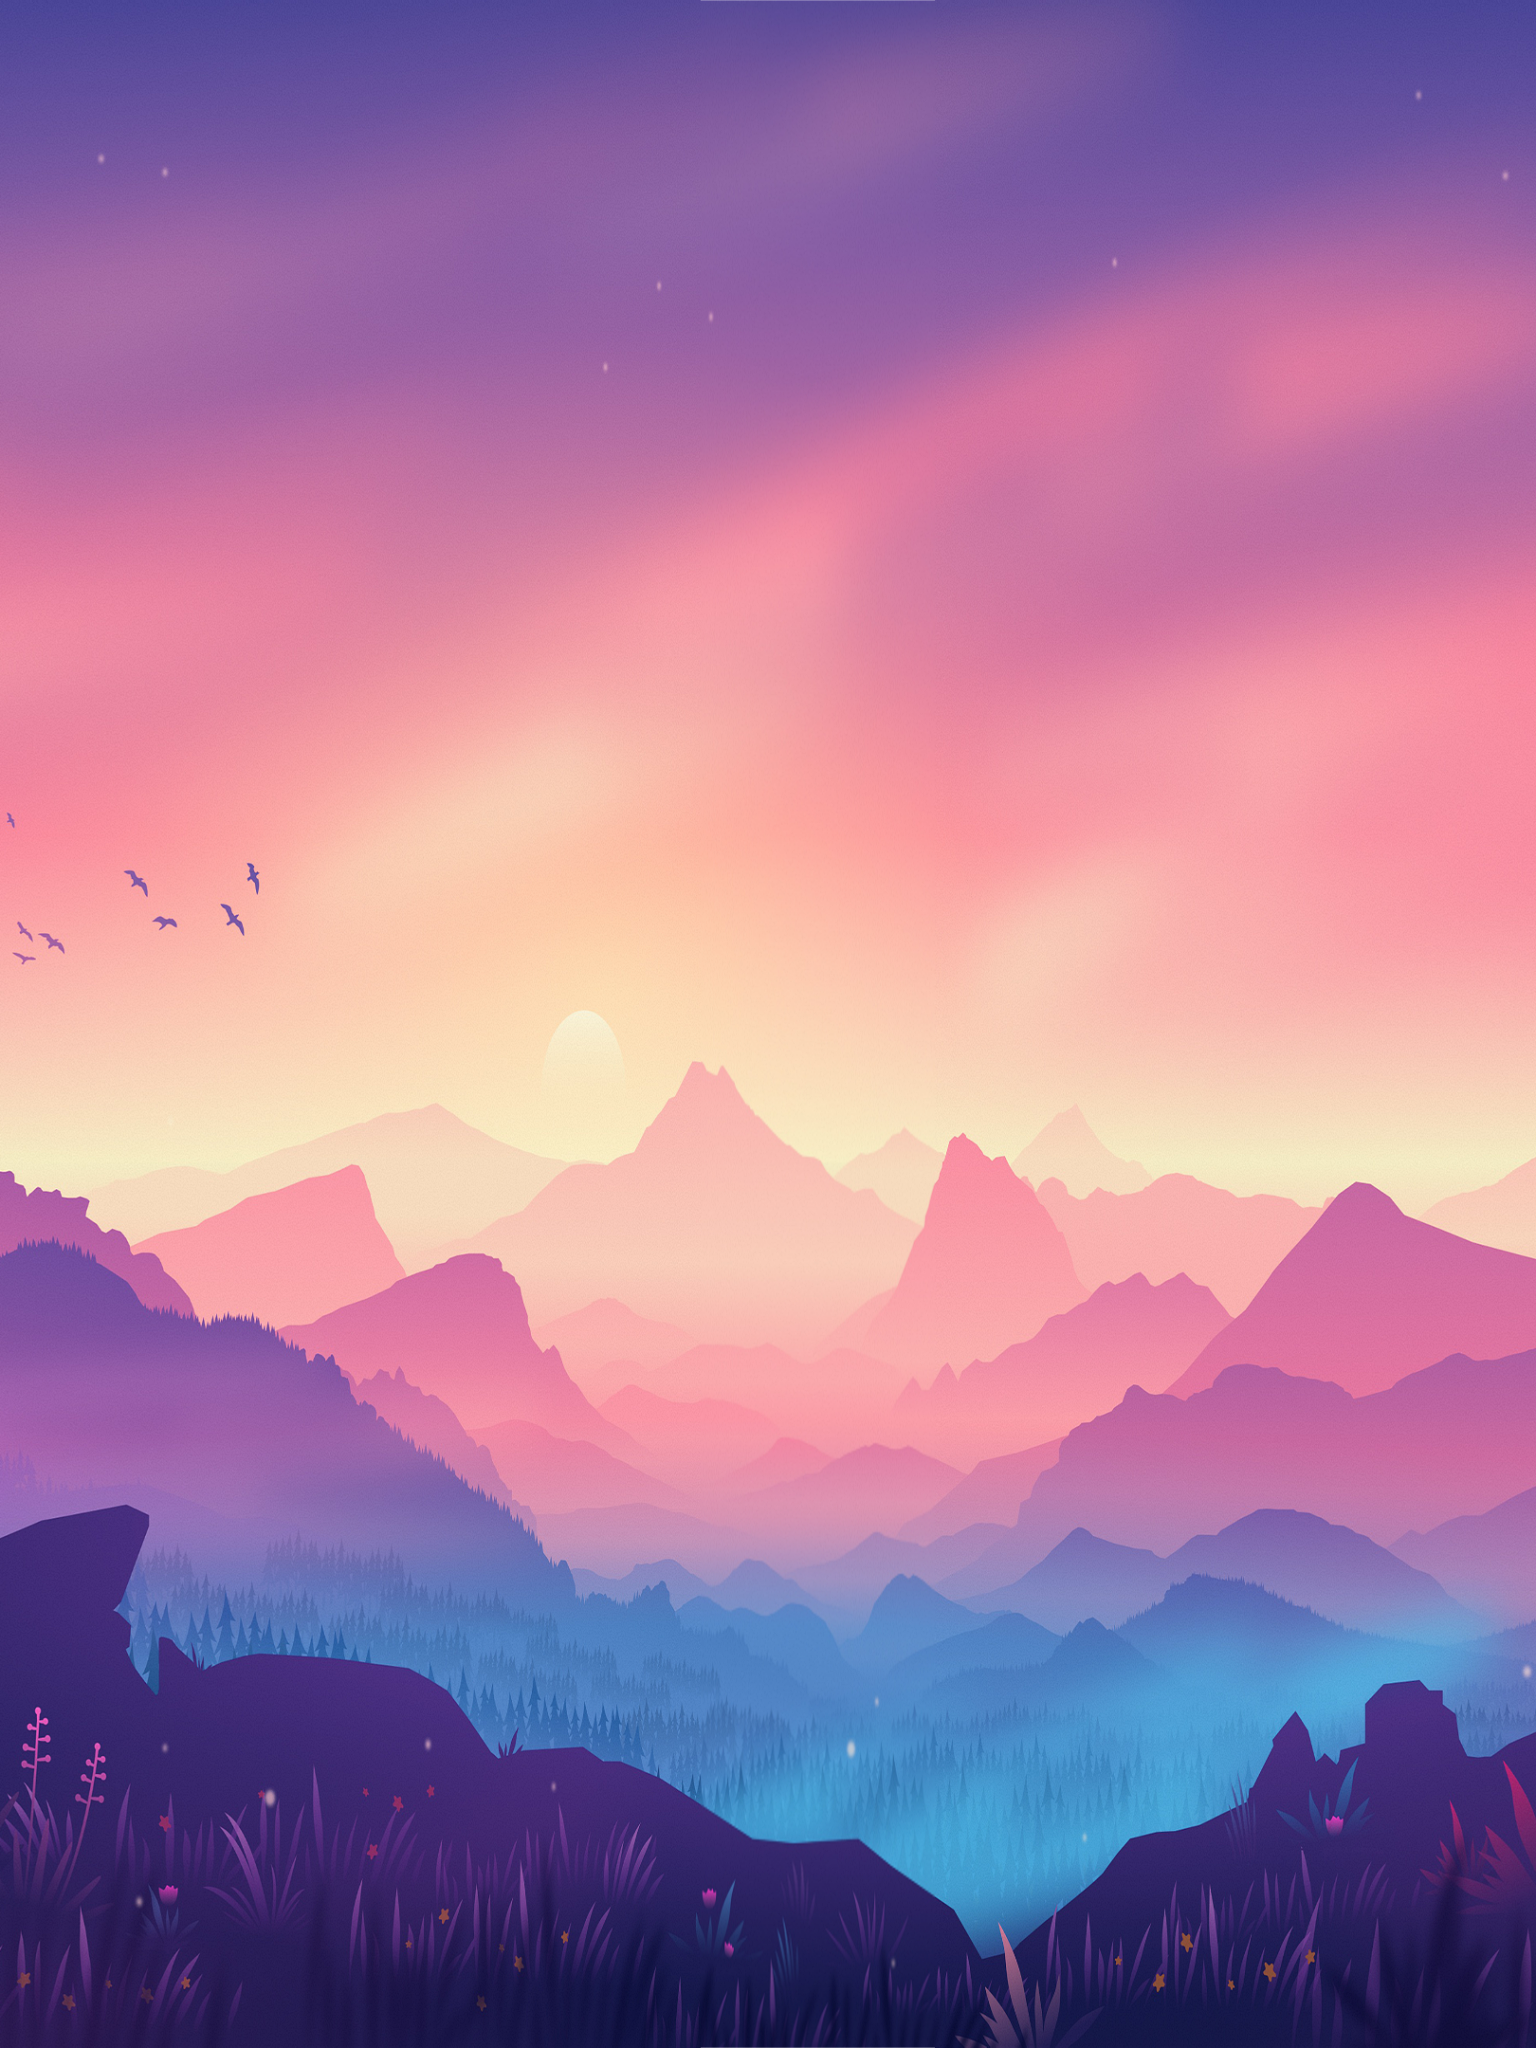 ILLUSTRATION OF A STUNNING VIEW. COOL IMAGE TO USE AS IPAD WALLPAPER